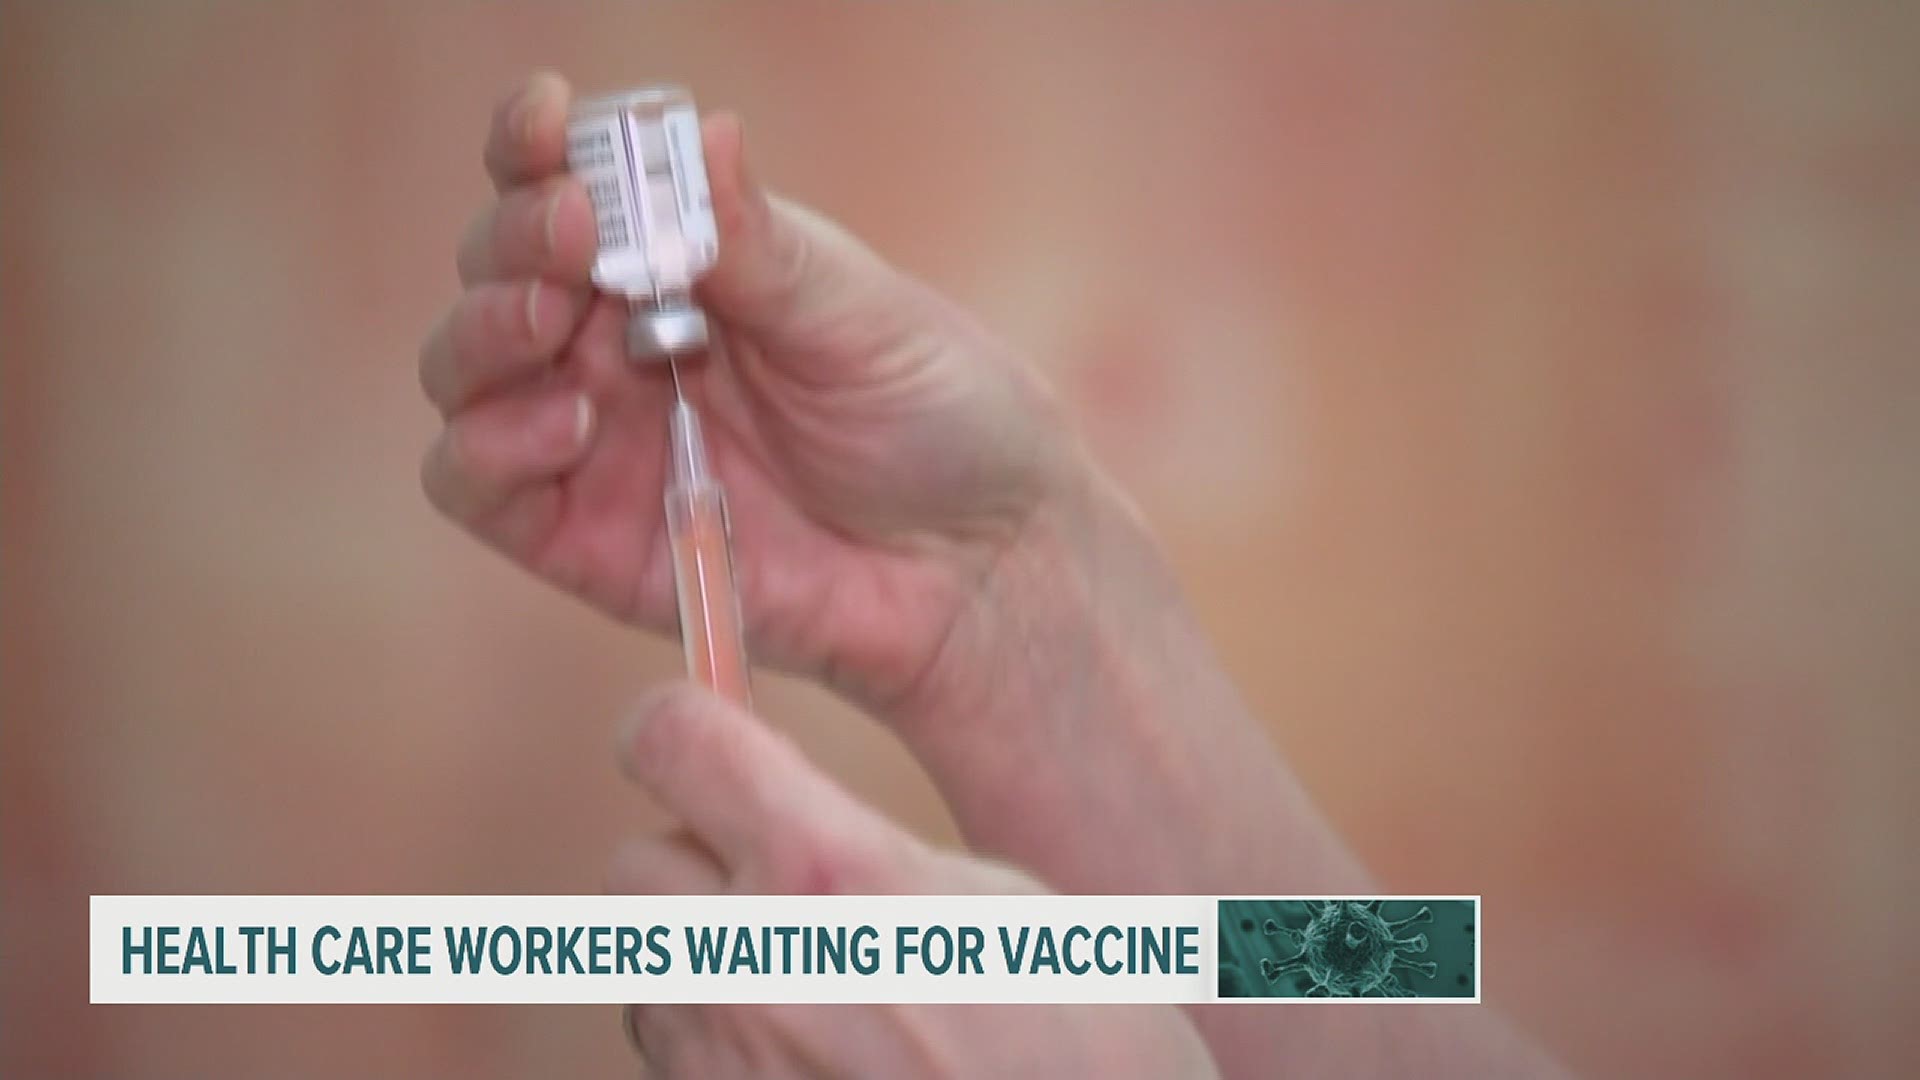 Non-affiliated health care workers, who are not employed by a hospital system, have reported problems trying to schedule vaccinations.